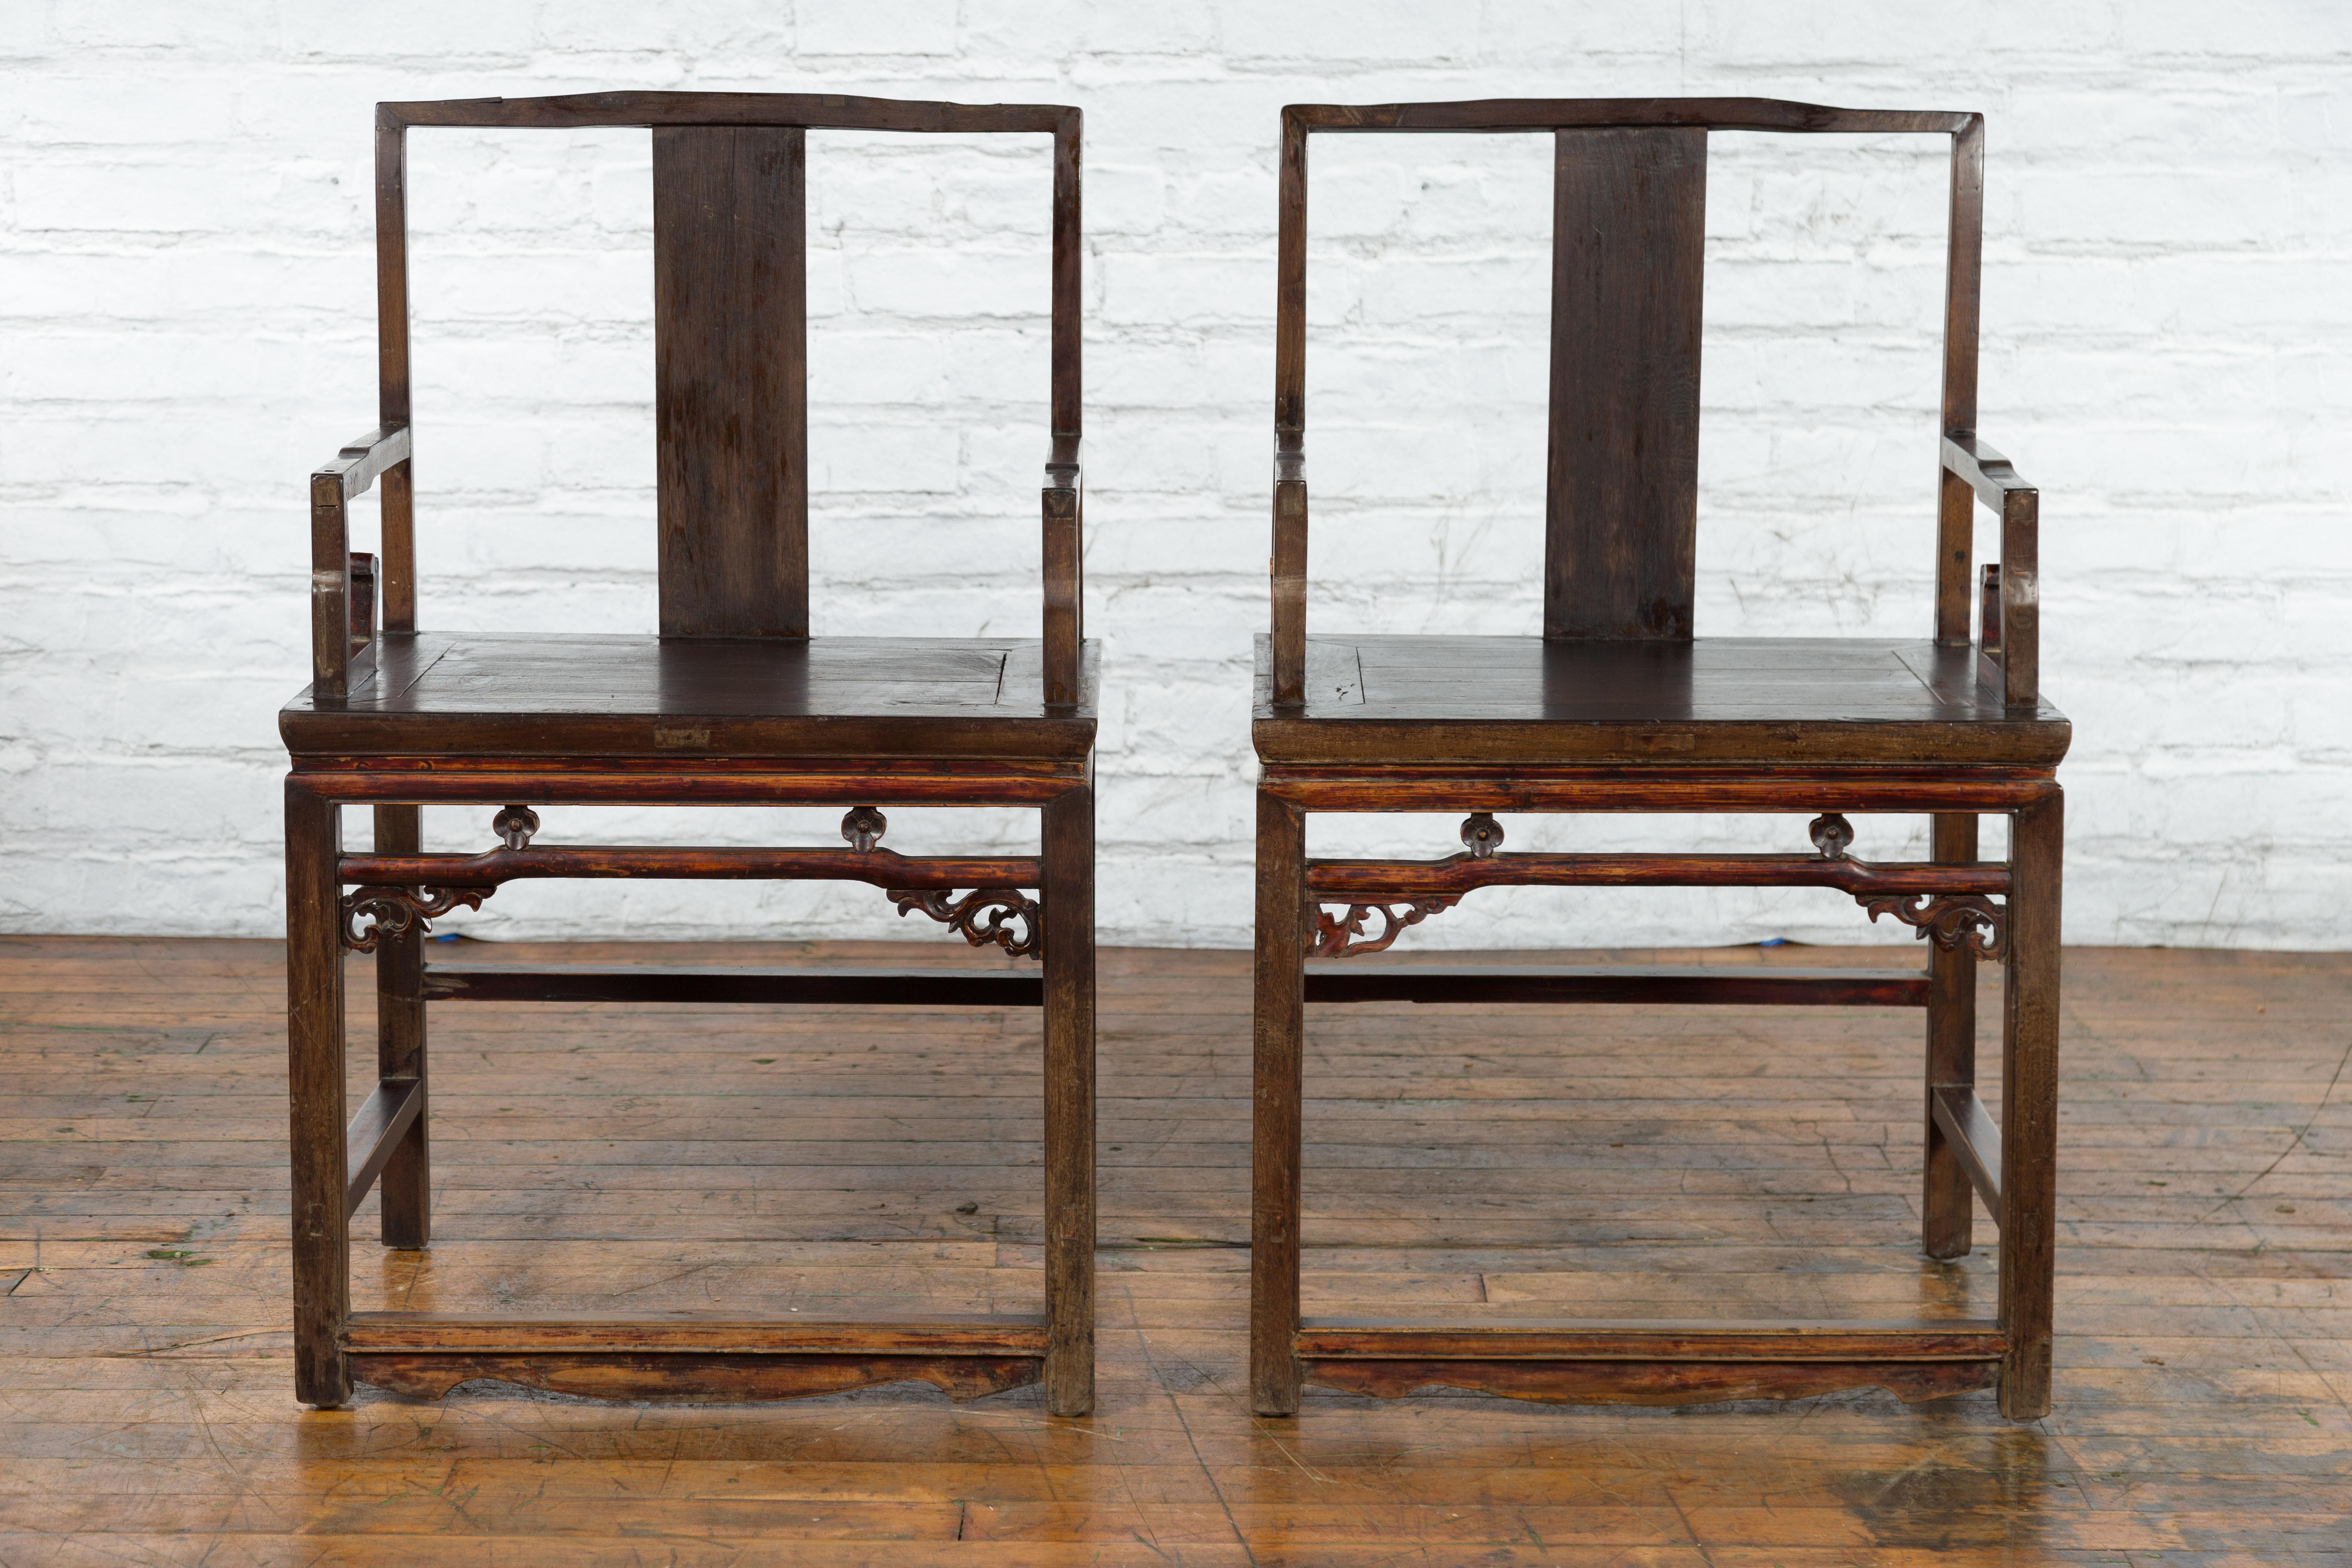 A pair of Chinese Qing Dynasty period armchairs from the 19th century, with open backs, scrolling arms, carved aprons and low stretchers. Created in China during the Qing Dynasty period in the 19th century, each of this pair of armchairs features an